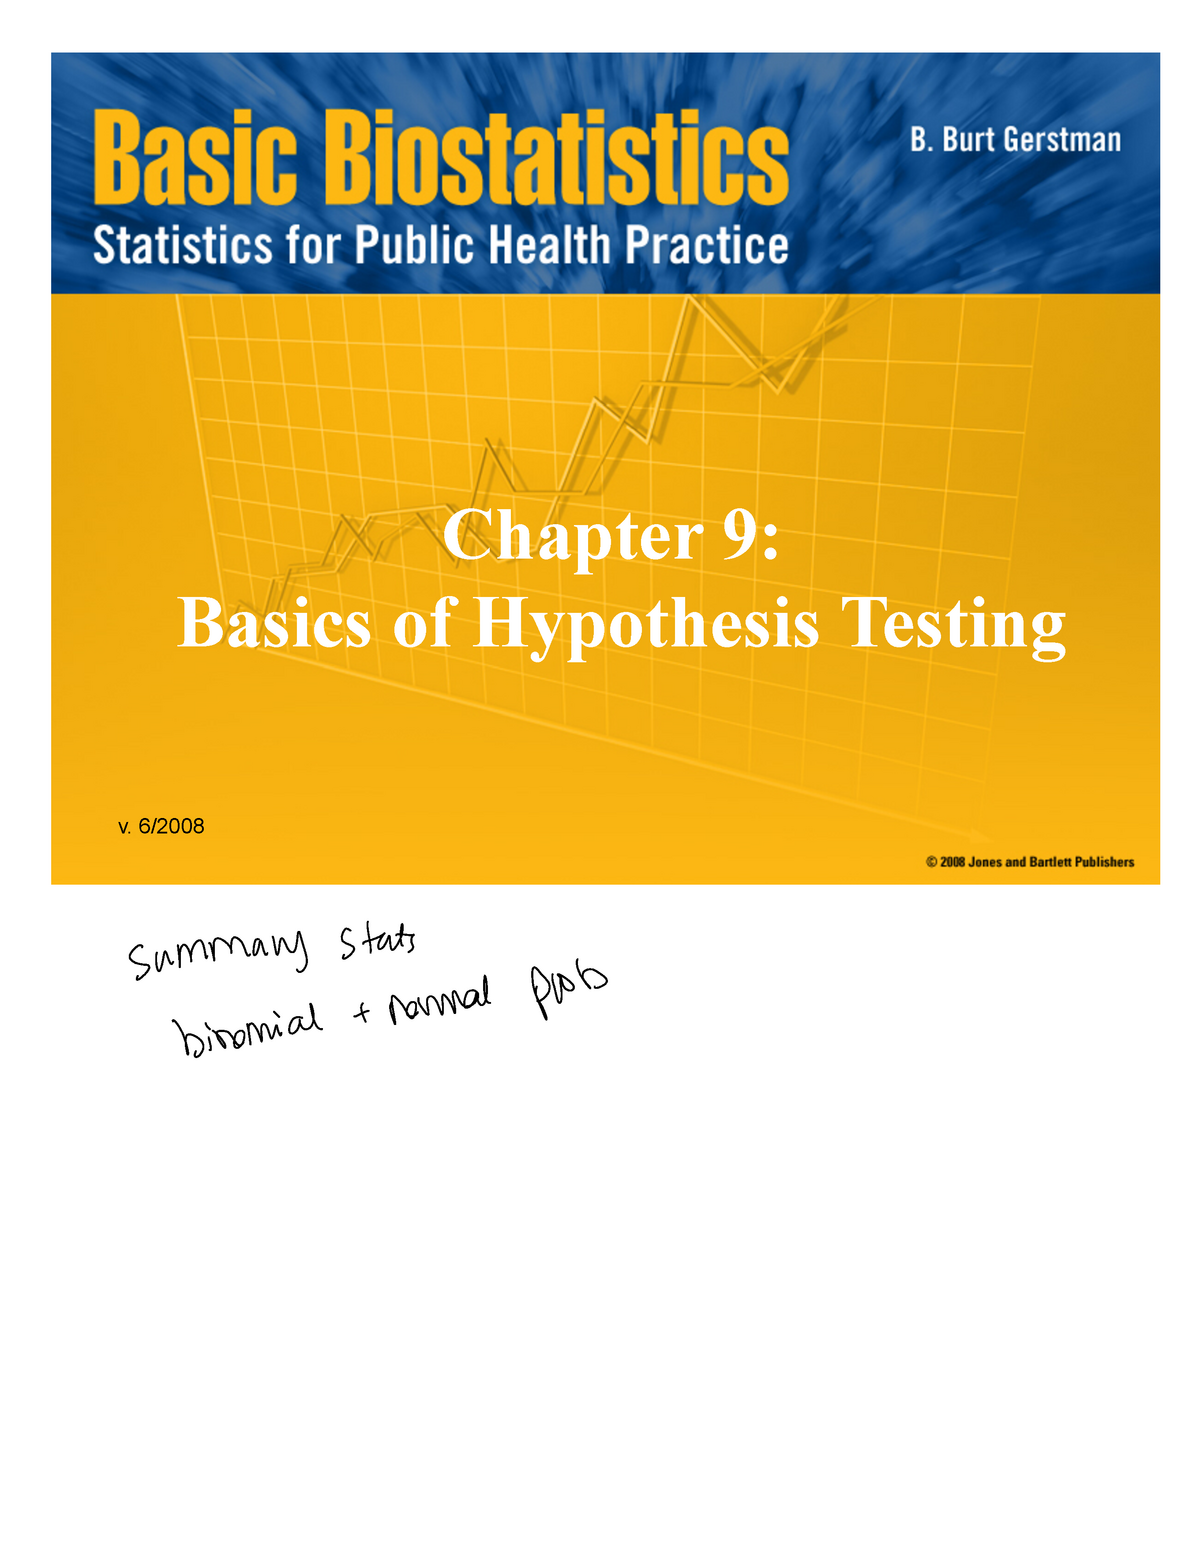 chapter 9 hypothesis testing